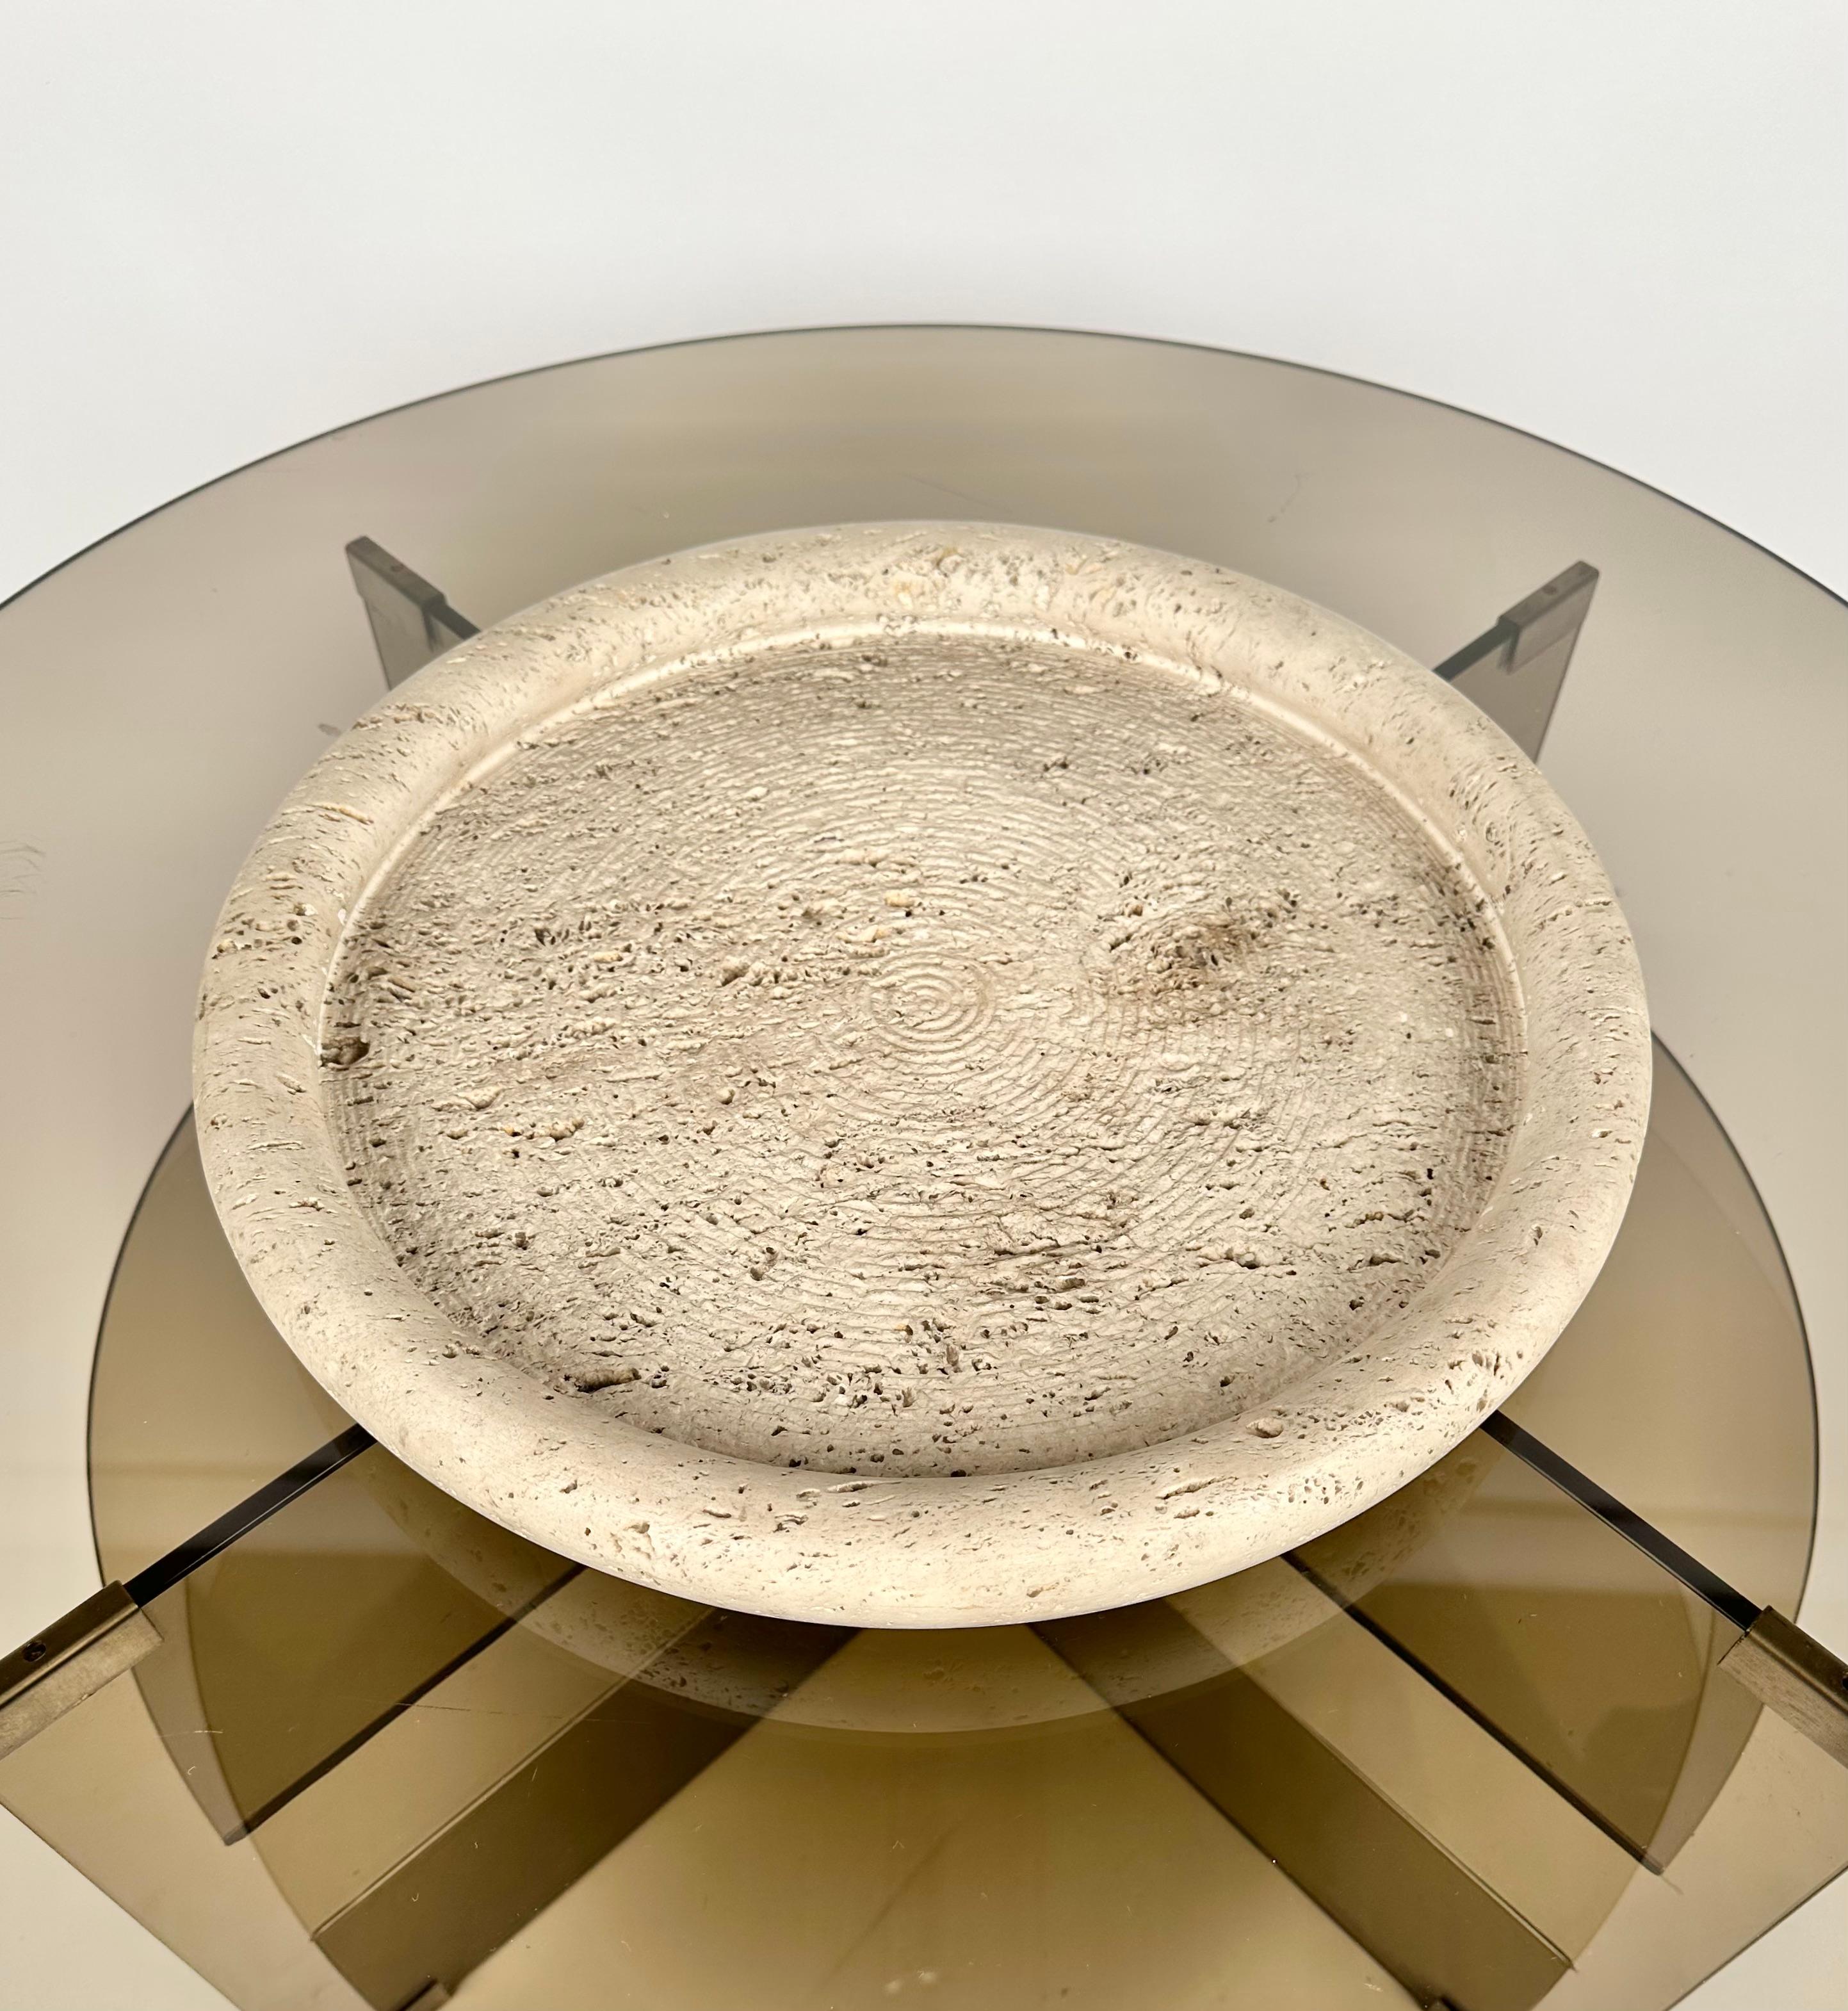 Midcentury large round vide-poche dish in travertine by Fratelli Mannelli.

Made in Italy in the 1970s.

The original label is still attached on the back, as shown in the pictures.